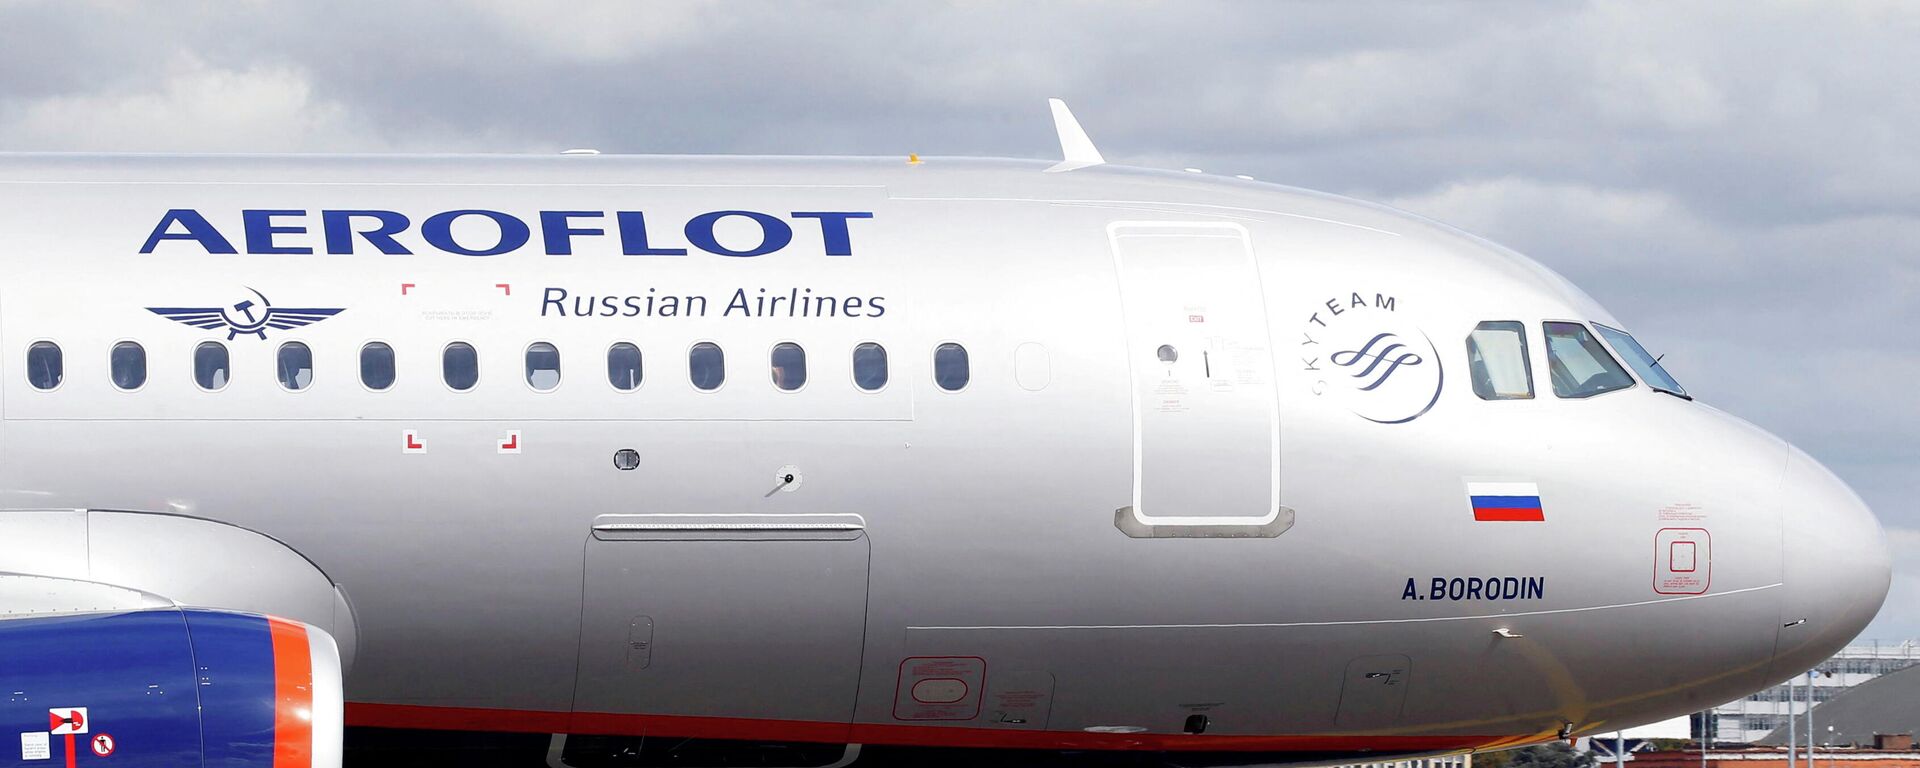 The logo of Russia's flagship airline Aeroflot is seen on an Airbus A320-200 in Colomiers near Toulouse, France, September 26, 2017 - Sputnik International, 1920, 02.03.2022